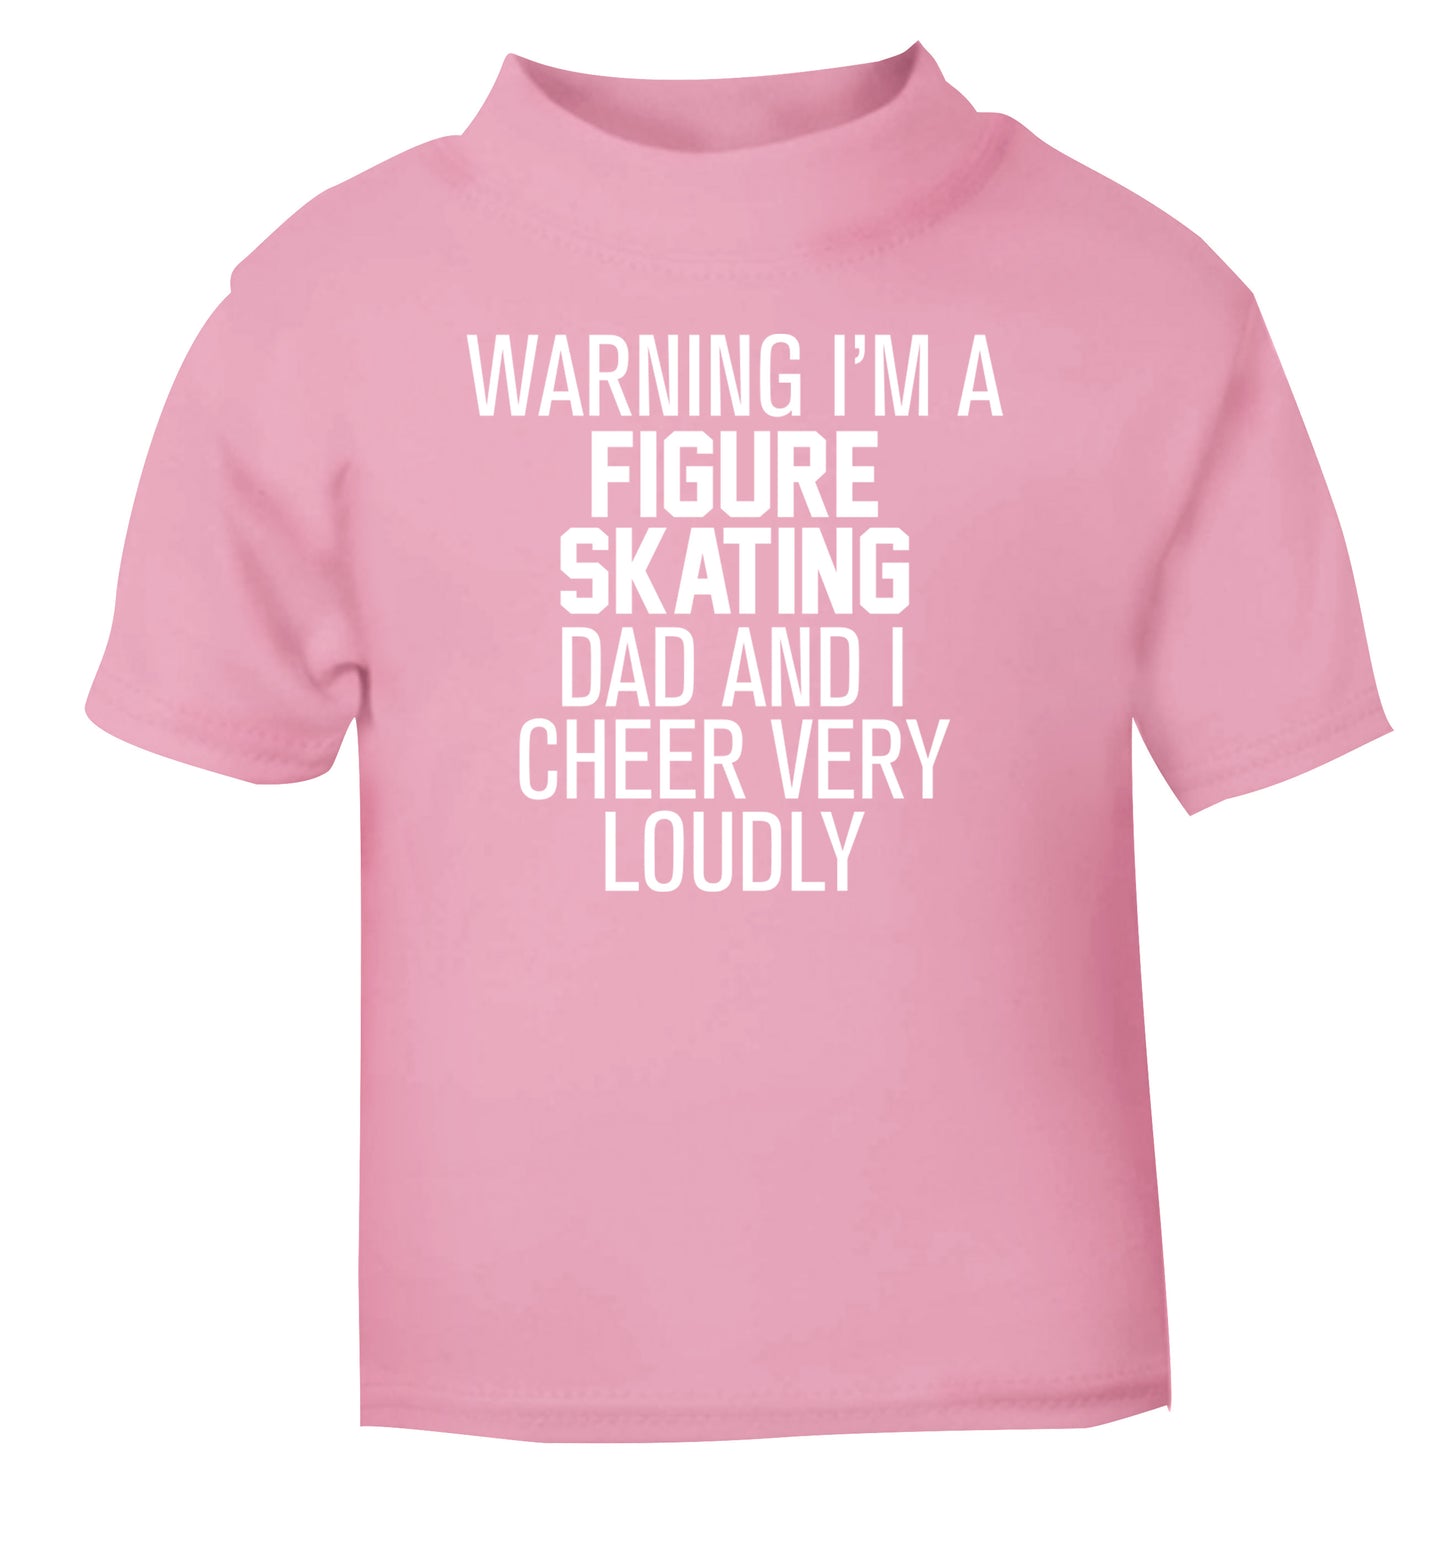 Warning I'm a figure skating dad and I cheer very loudly light pink Baby Toddler Tshirt 2 Years